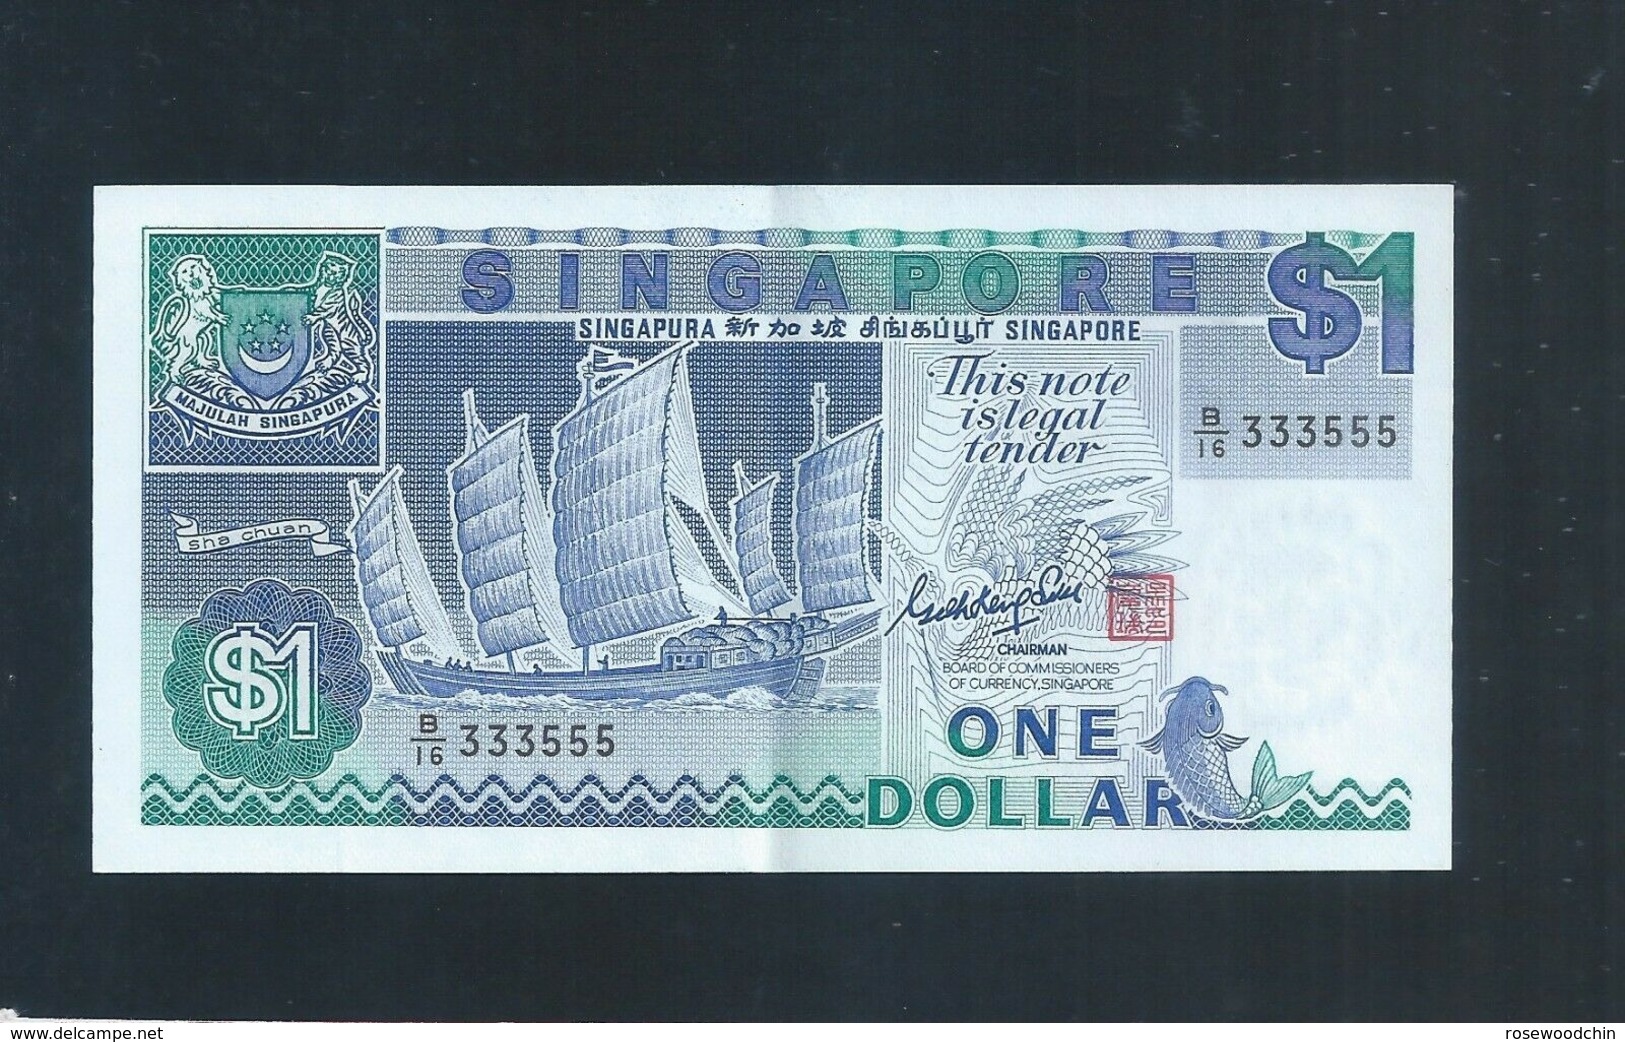 Banknote - Singapore $1 Ship Series Repeater Lucky Number B/16-333555 (#136) - Singapour